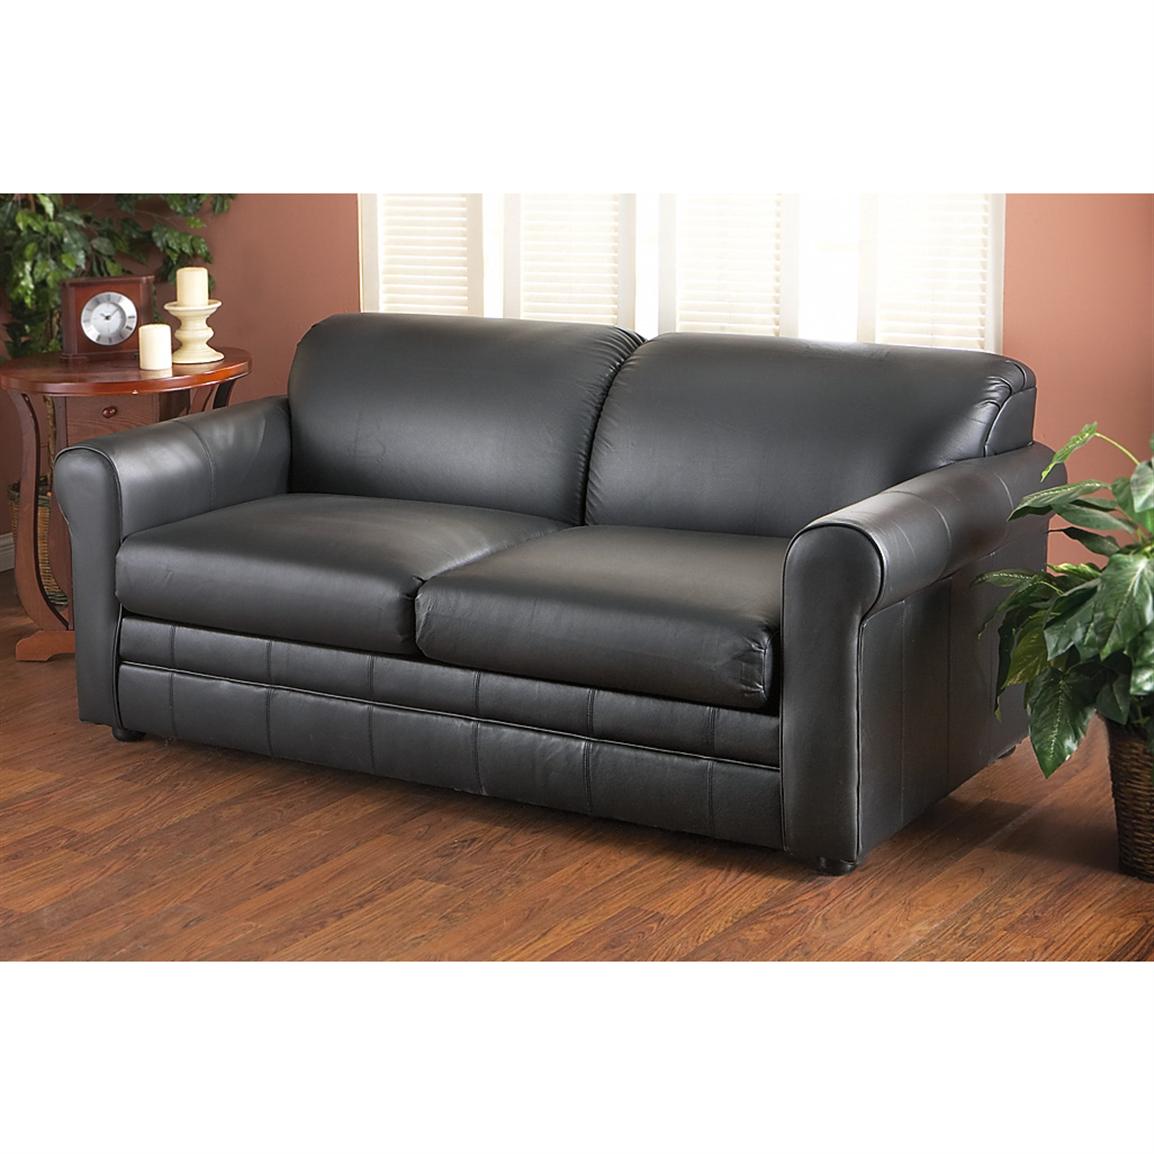 Queen Klaussner® Leather Sleeper Sofa - 142318, Living Room at